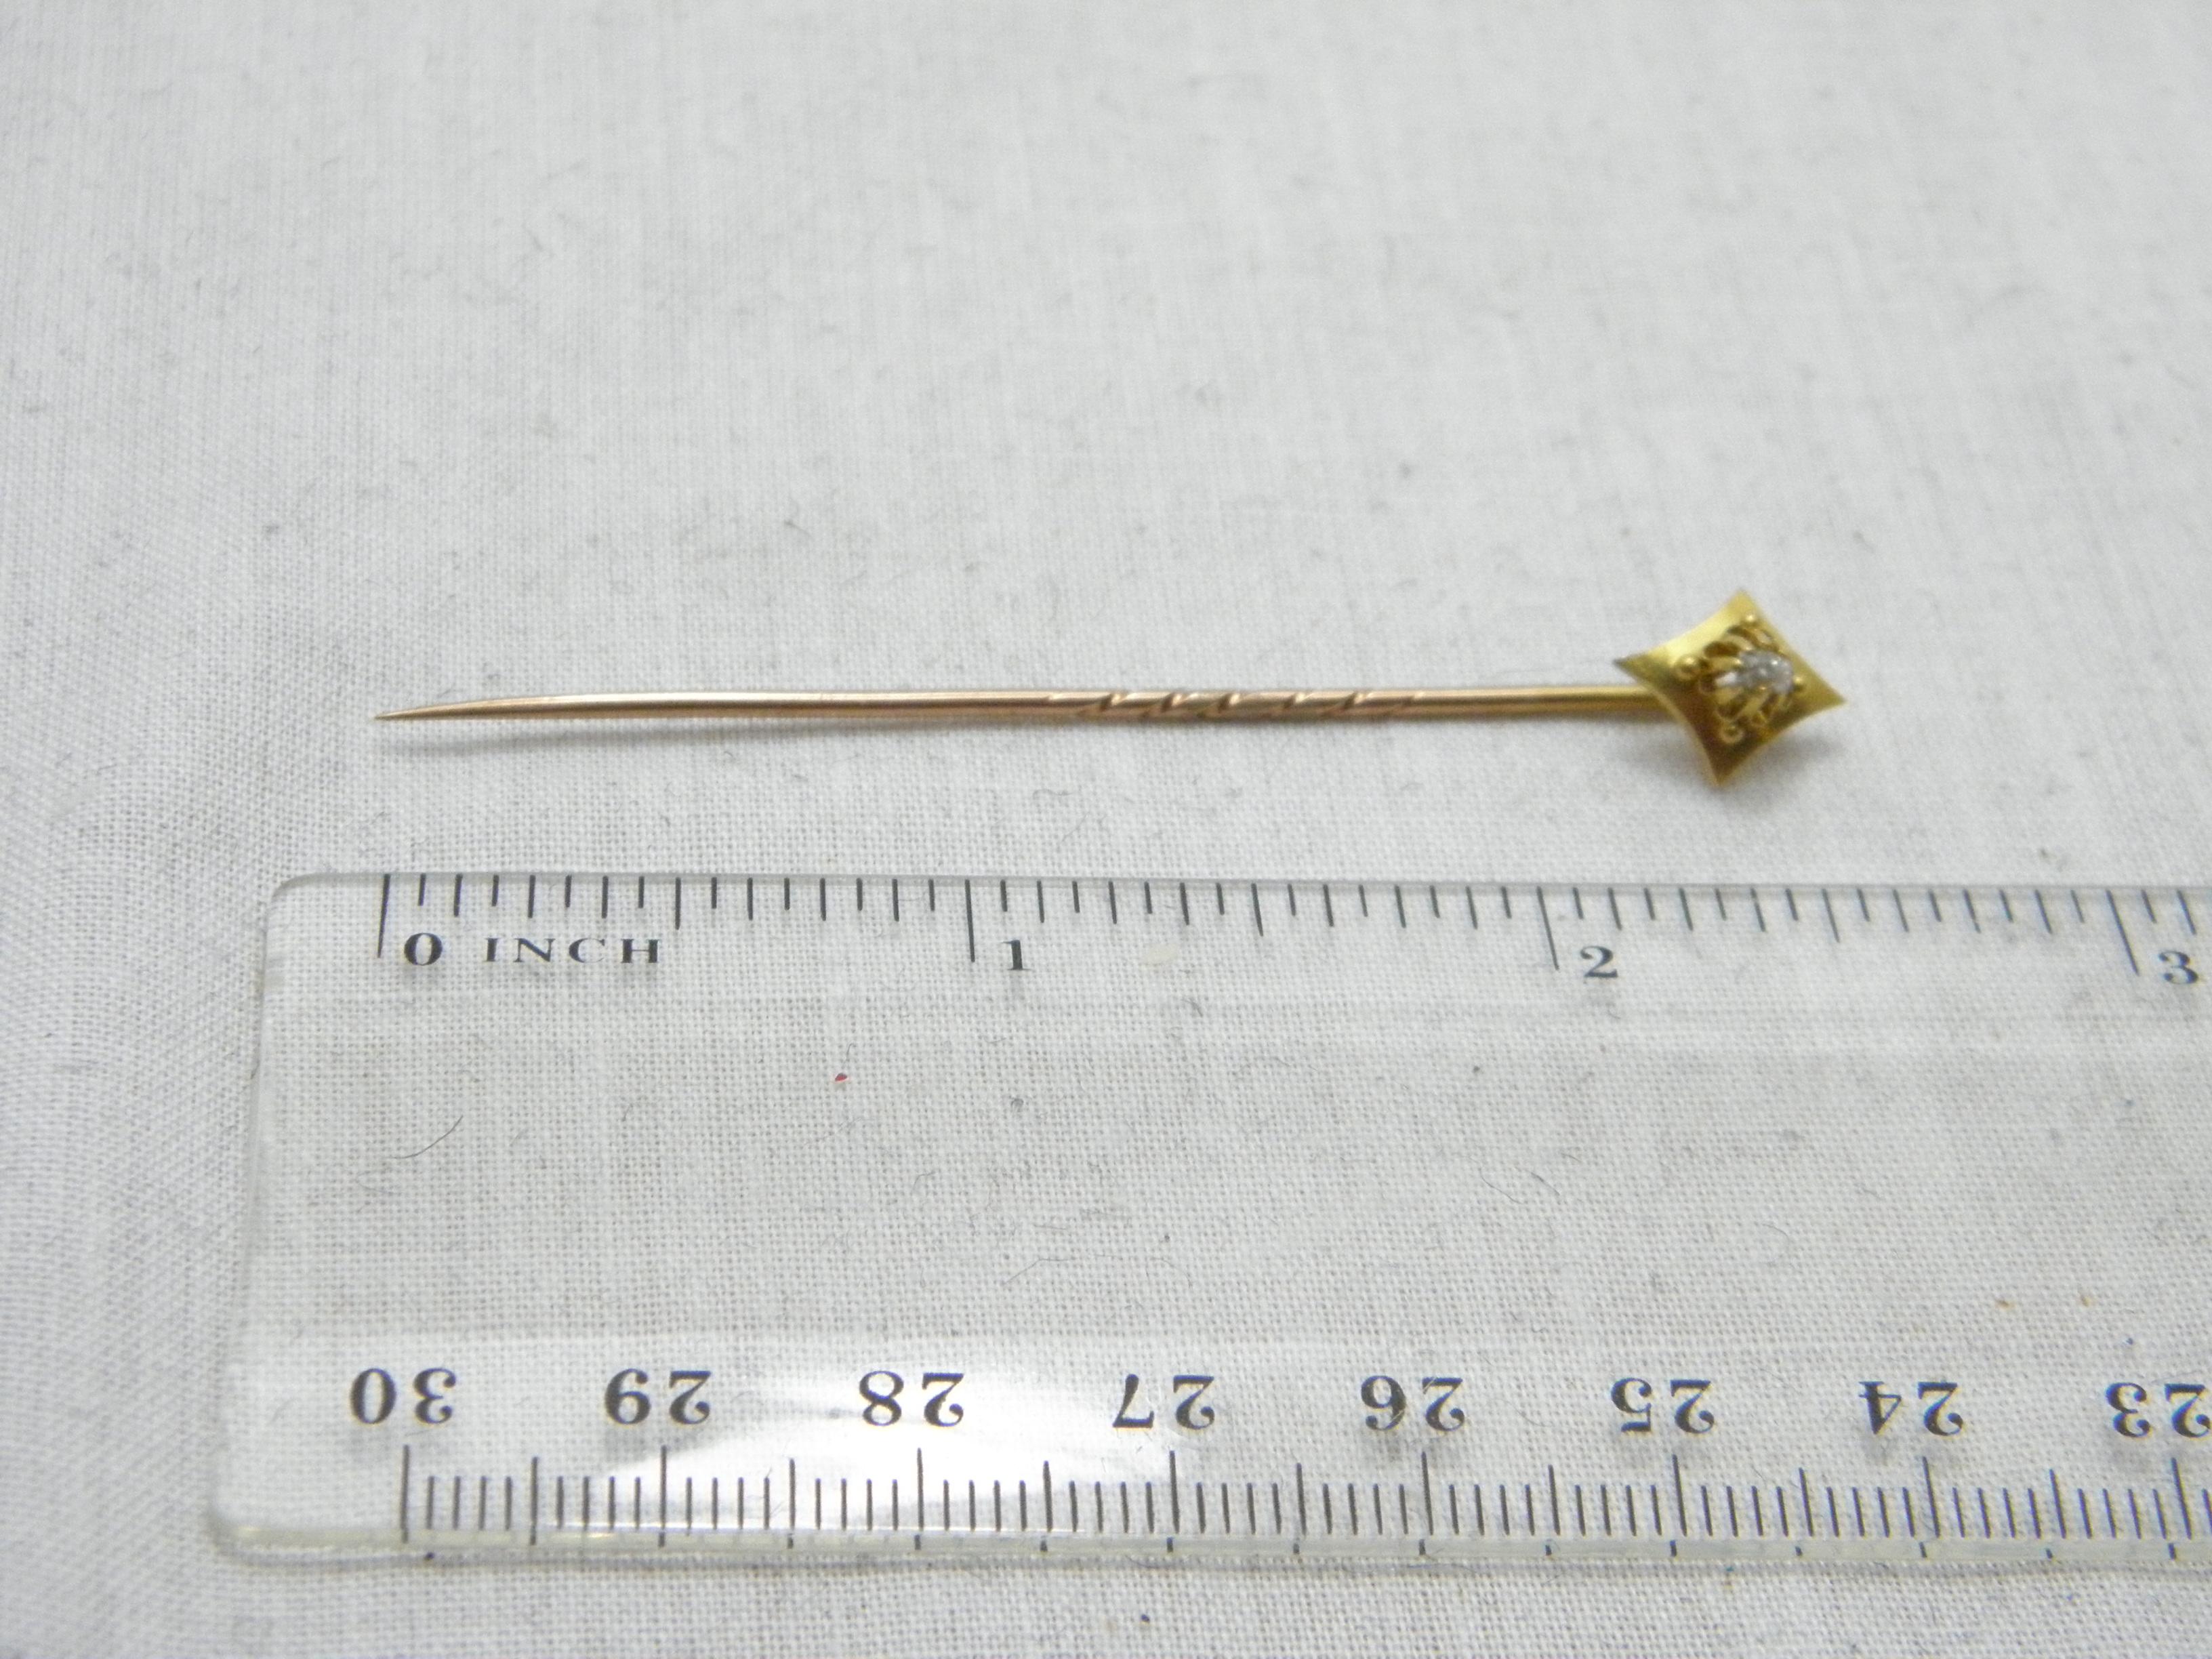 If you have landed on this page then you have an eye for beauty.

On offer is this gorgeous

15CT GOLD NATURAL DIAMOND STOCK PIN BROOCH

DETAILS
Material: 15ct (625/000) Solid Heavy Yellow Gold
Style: Victorian classic pin in the stock style with